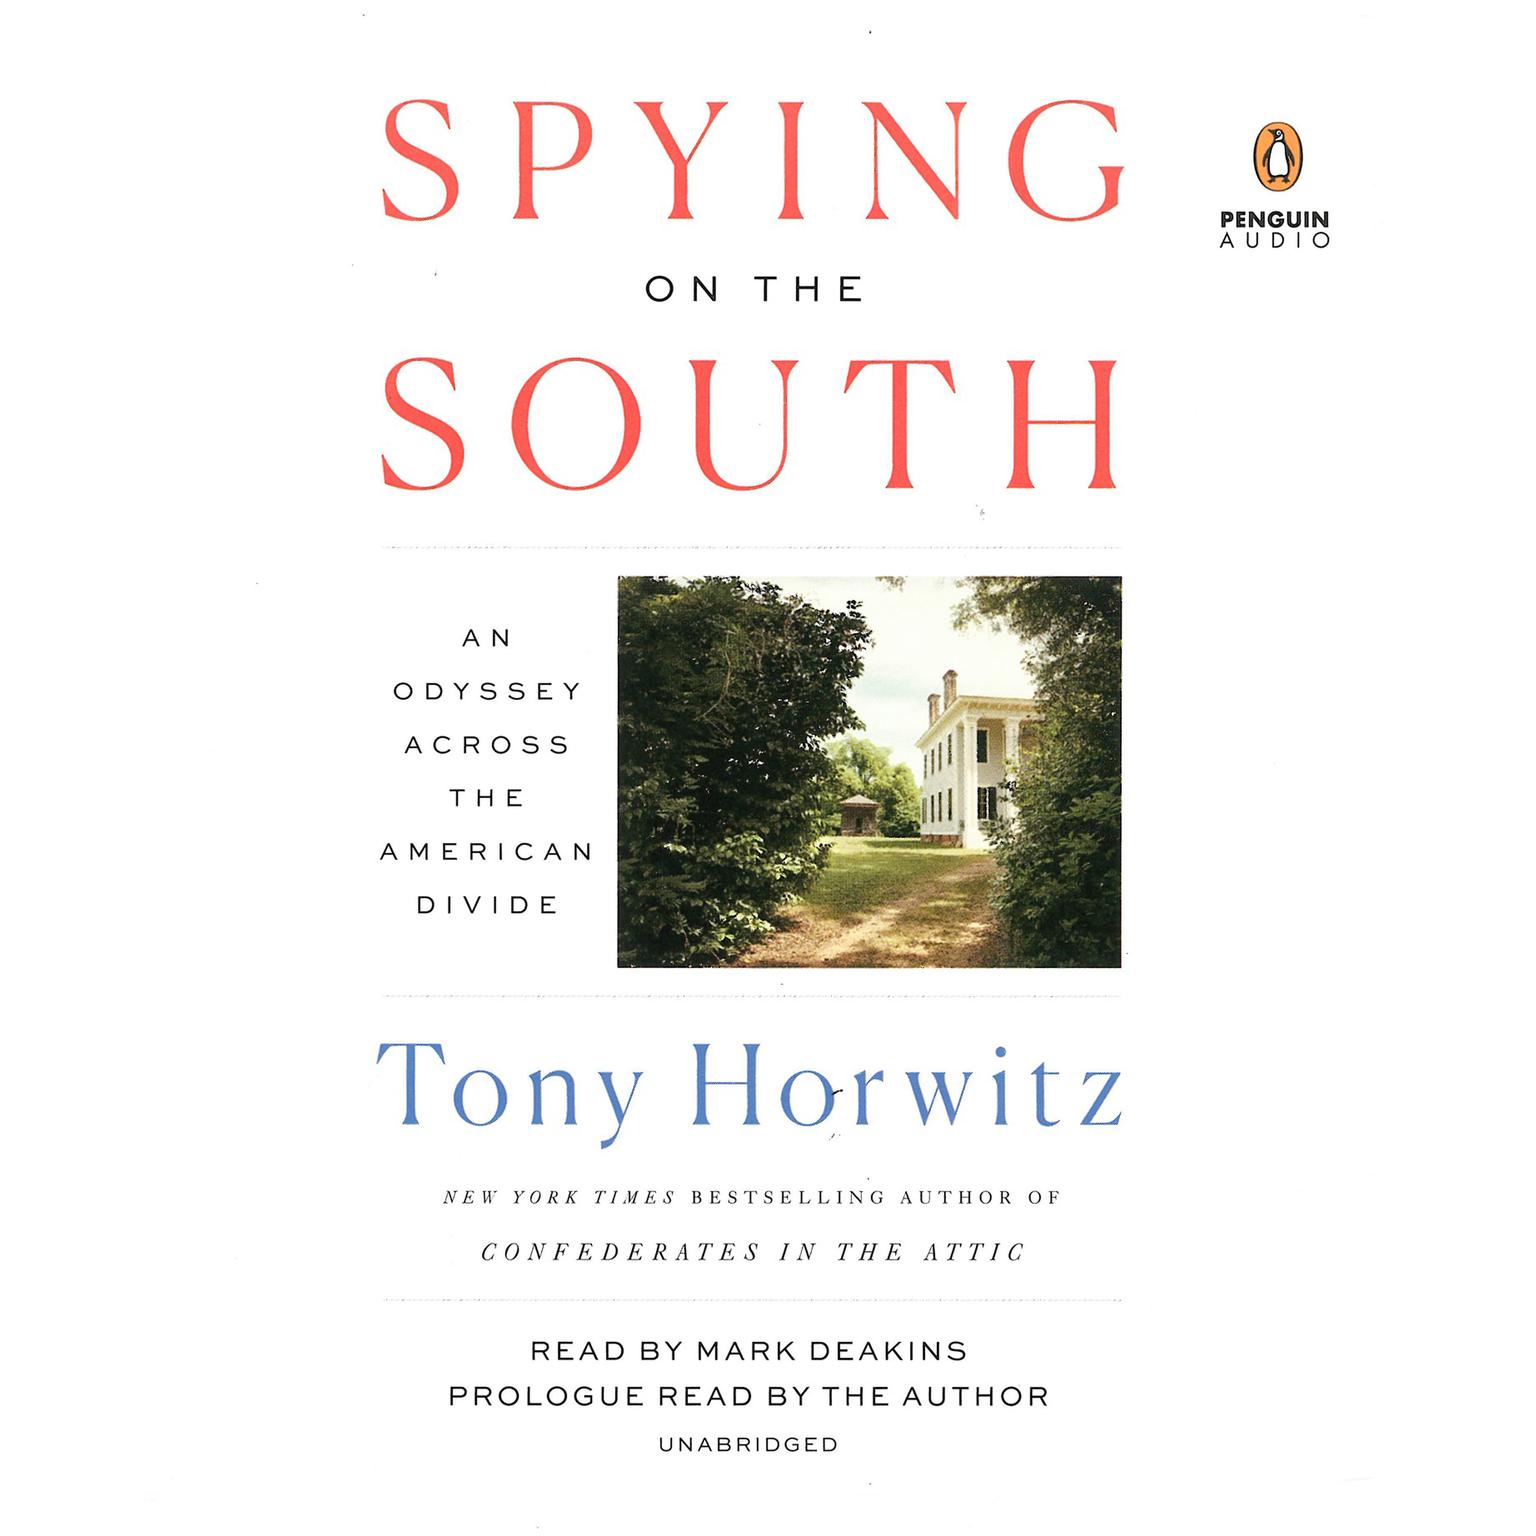 Spying on the South: An Odyssey Across the American Divide Audiobook, by Tony Horwitz